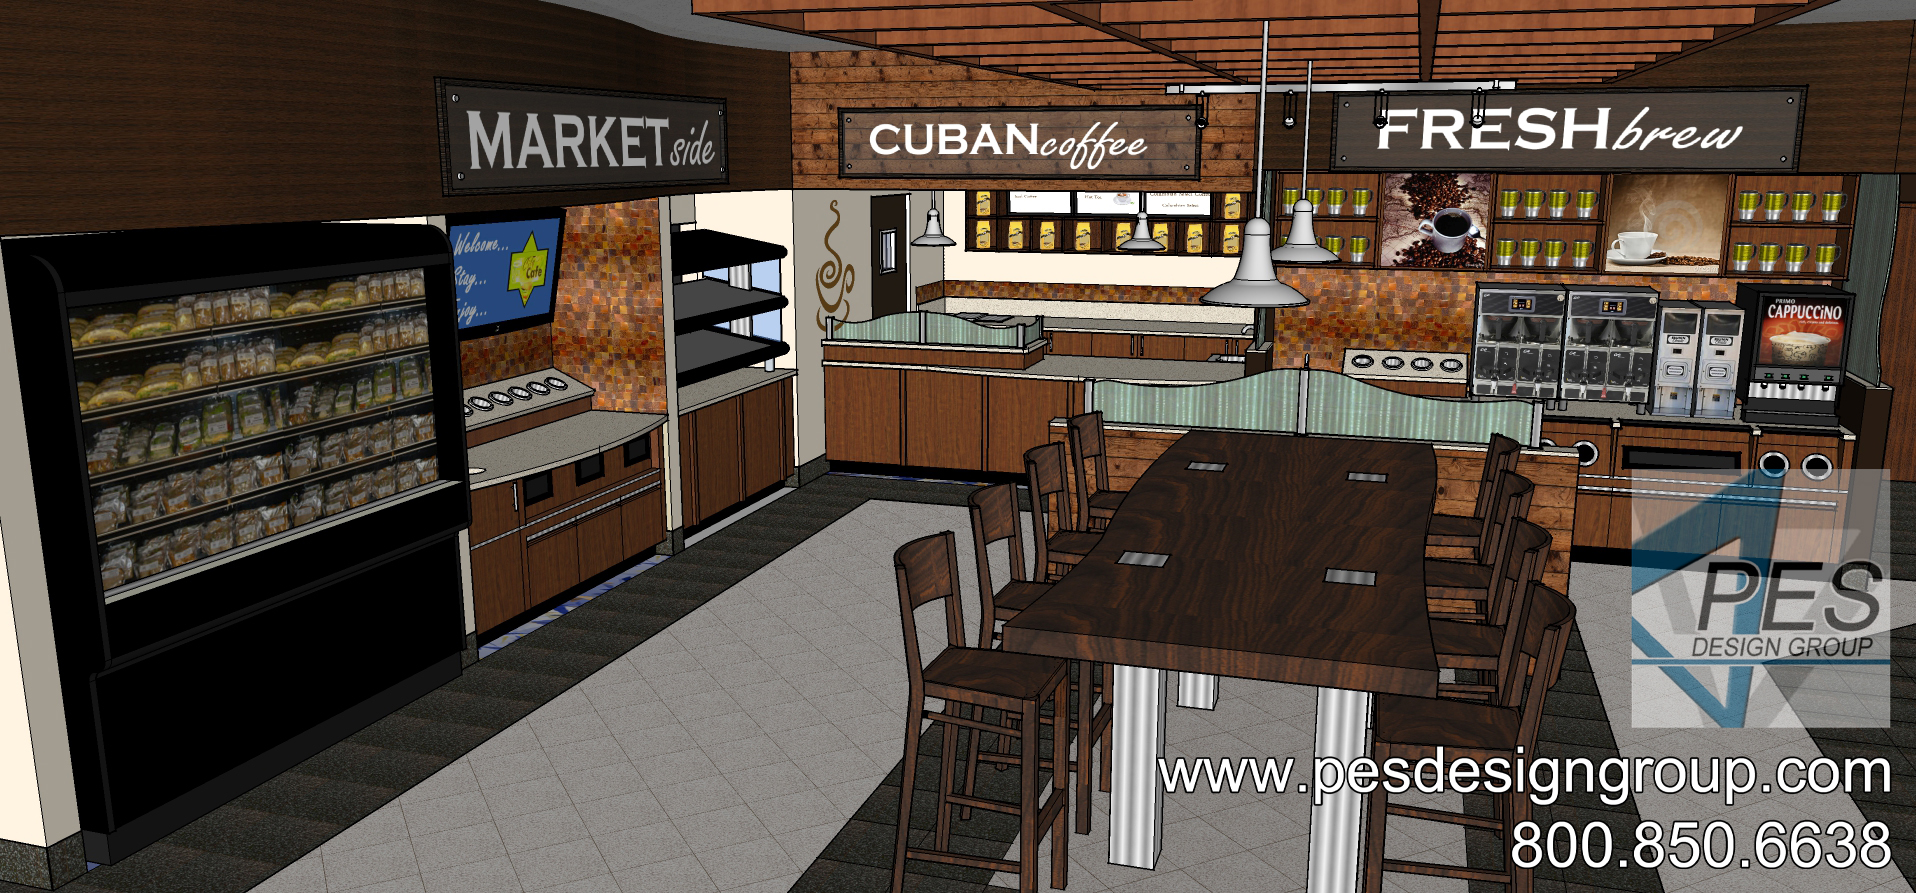 A concept rendering of the foodservice area, Cuban coffee and Fresh Brew counters at a Shell gas station and c-store in Coconut Creek, Florida.